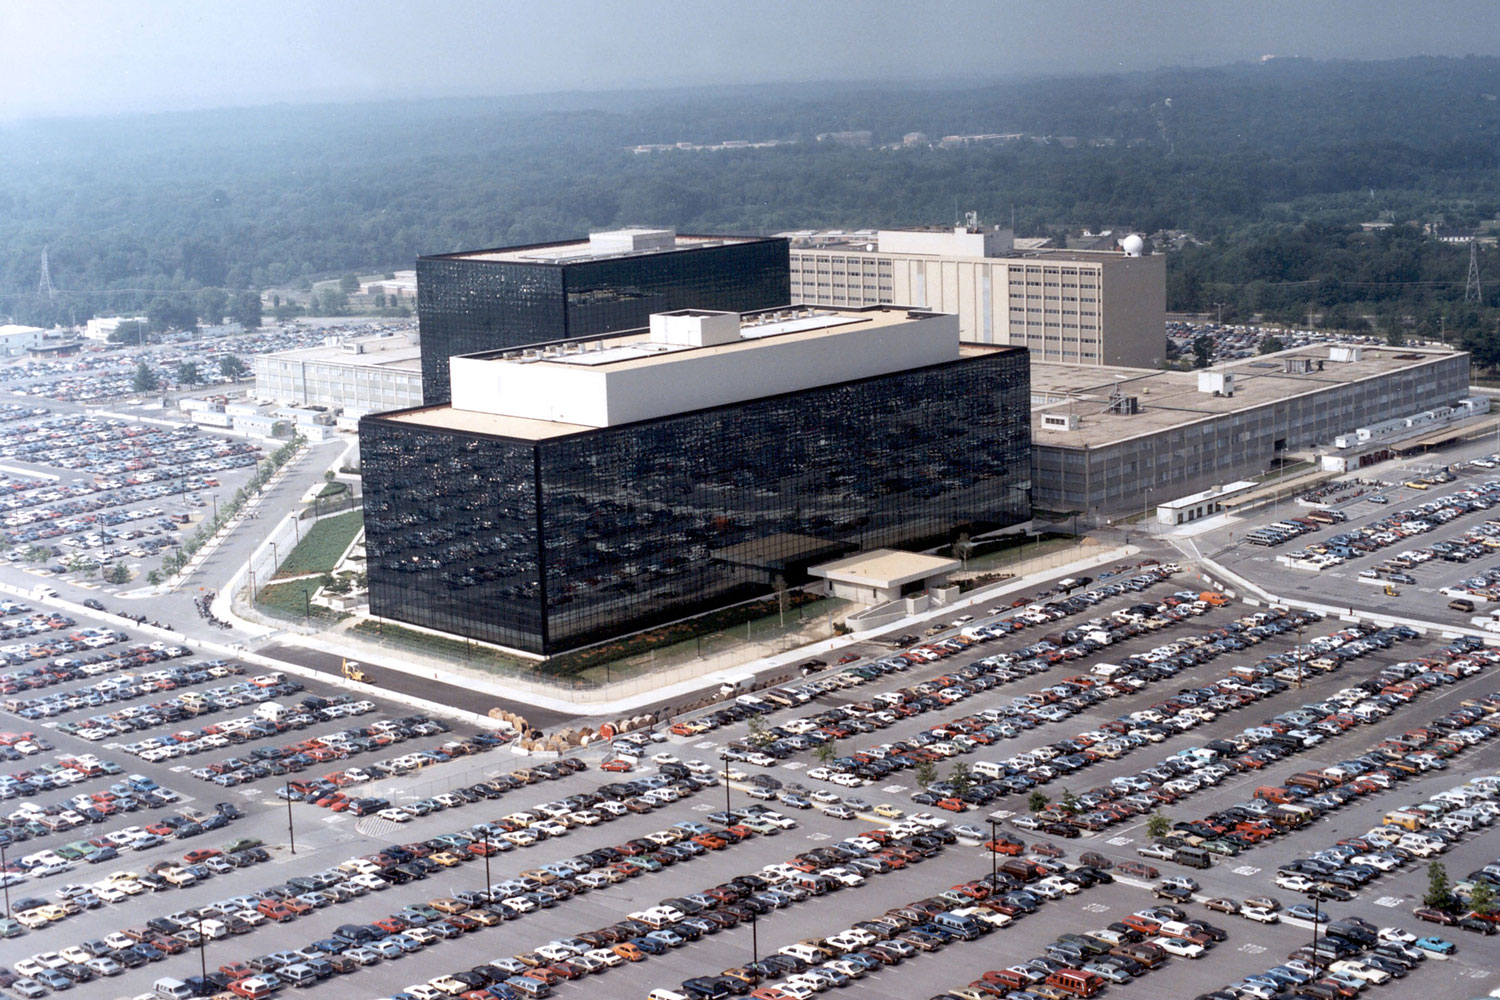 National Security Agency headquarters in Fort Meade, Md. (NSA/Getty Images)